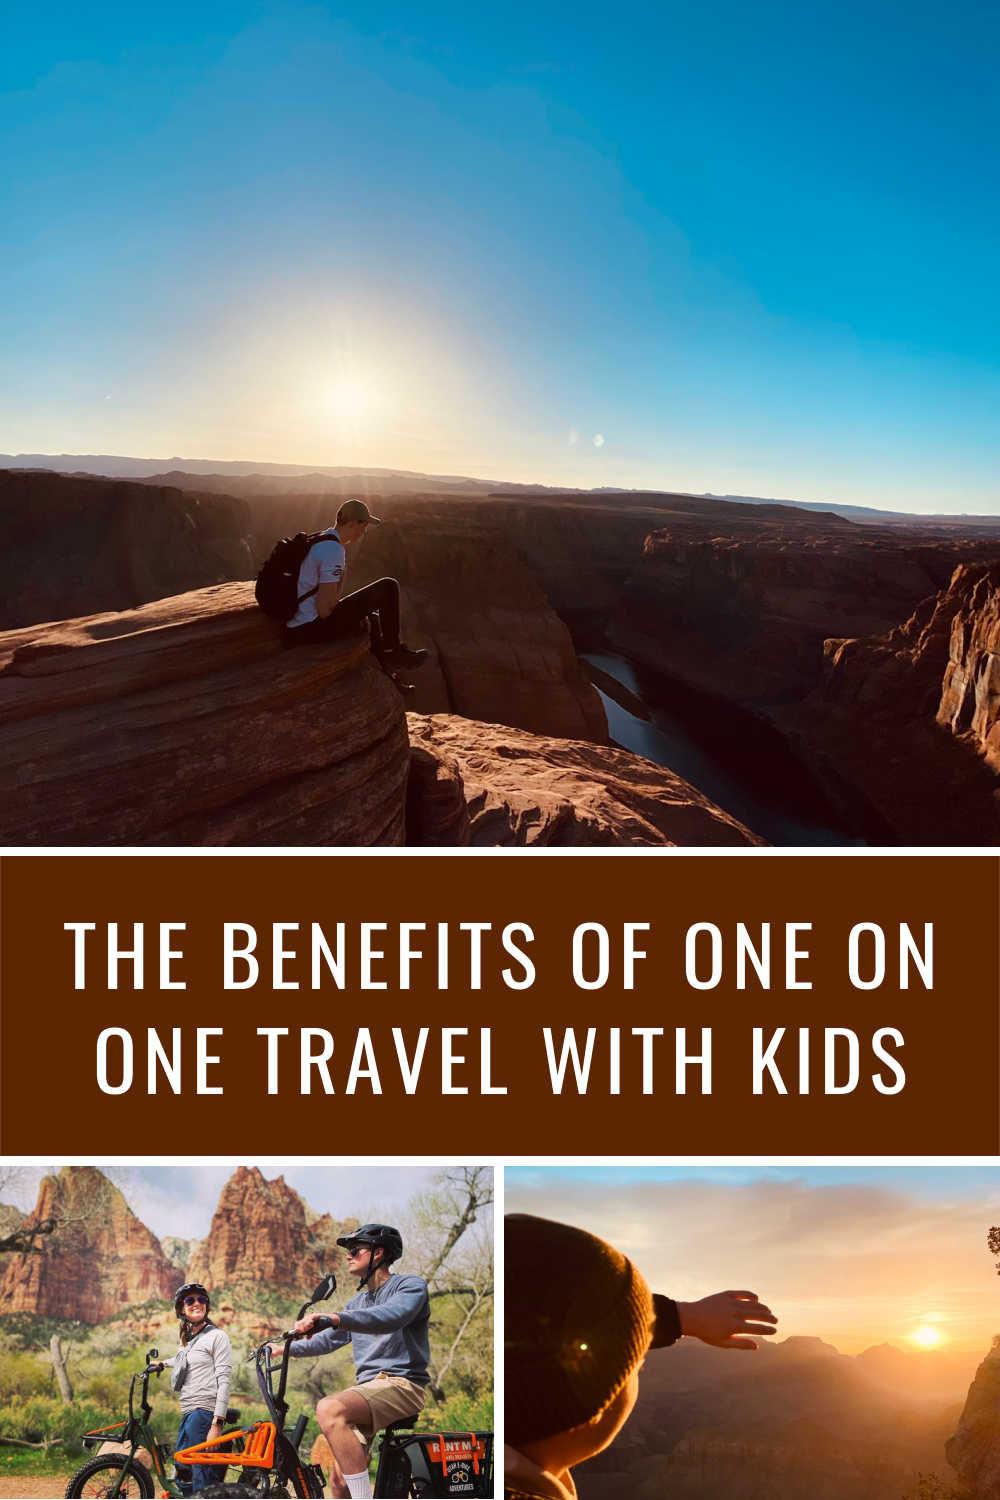 BENEFITS OF ONE ON ONE TRAVEL WITH KIDS